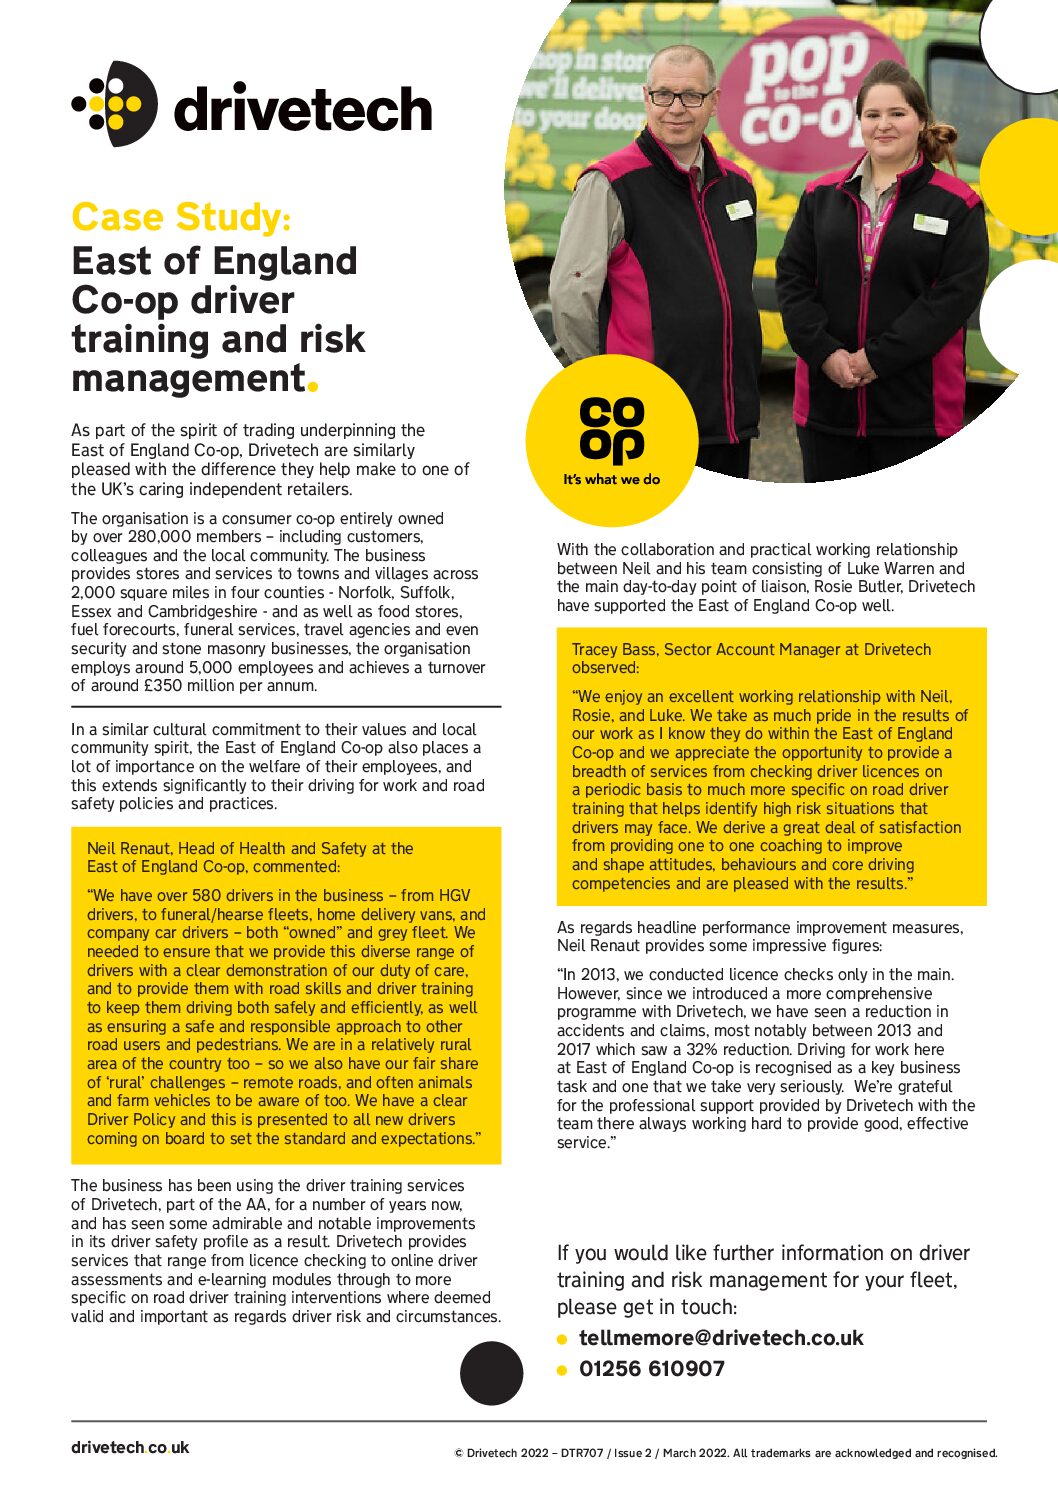 East of England Co-op Case Study – Driver Training & Risk Management